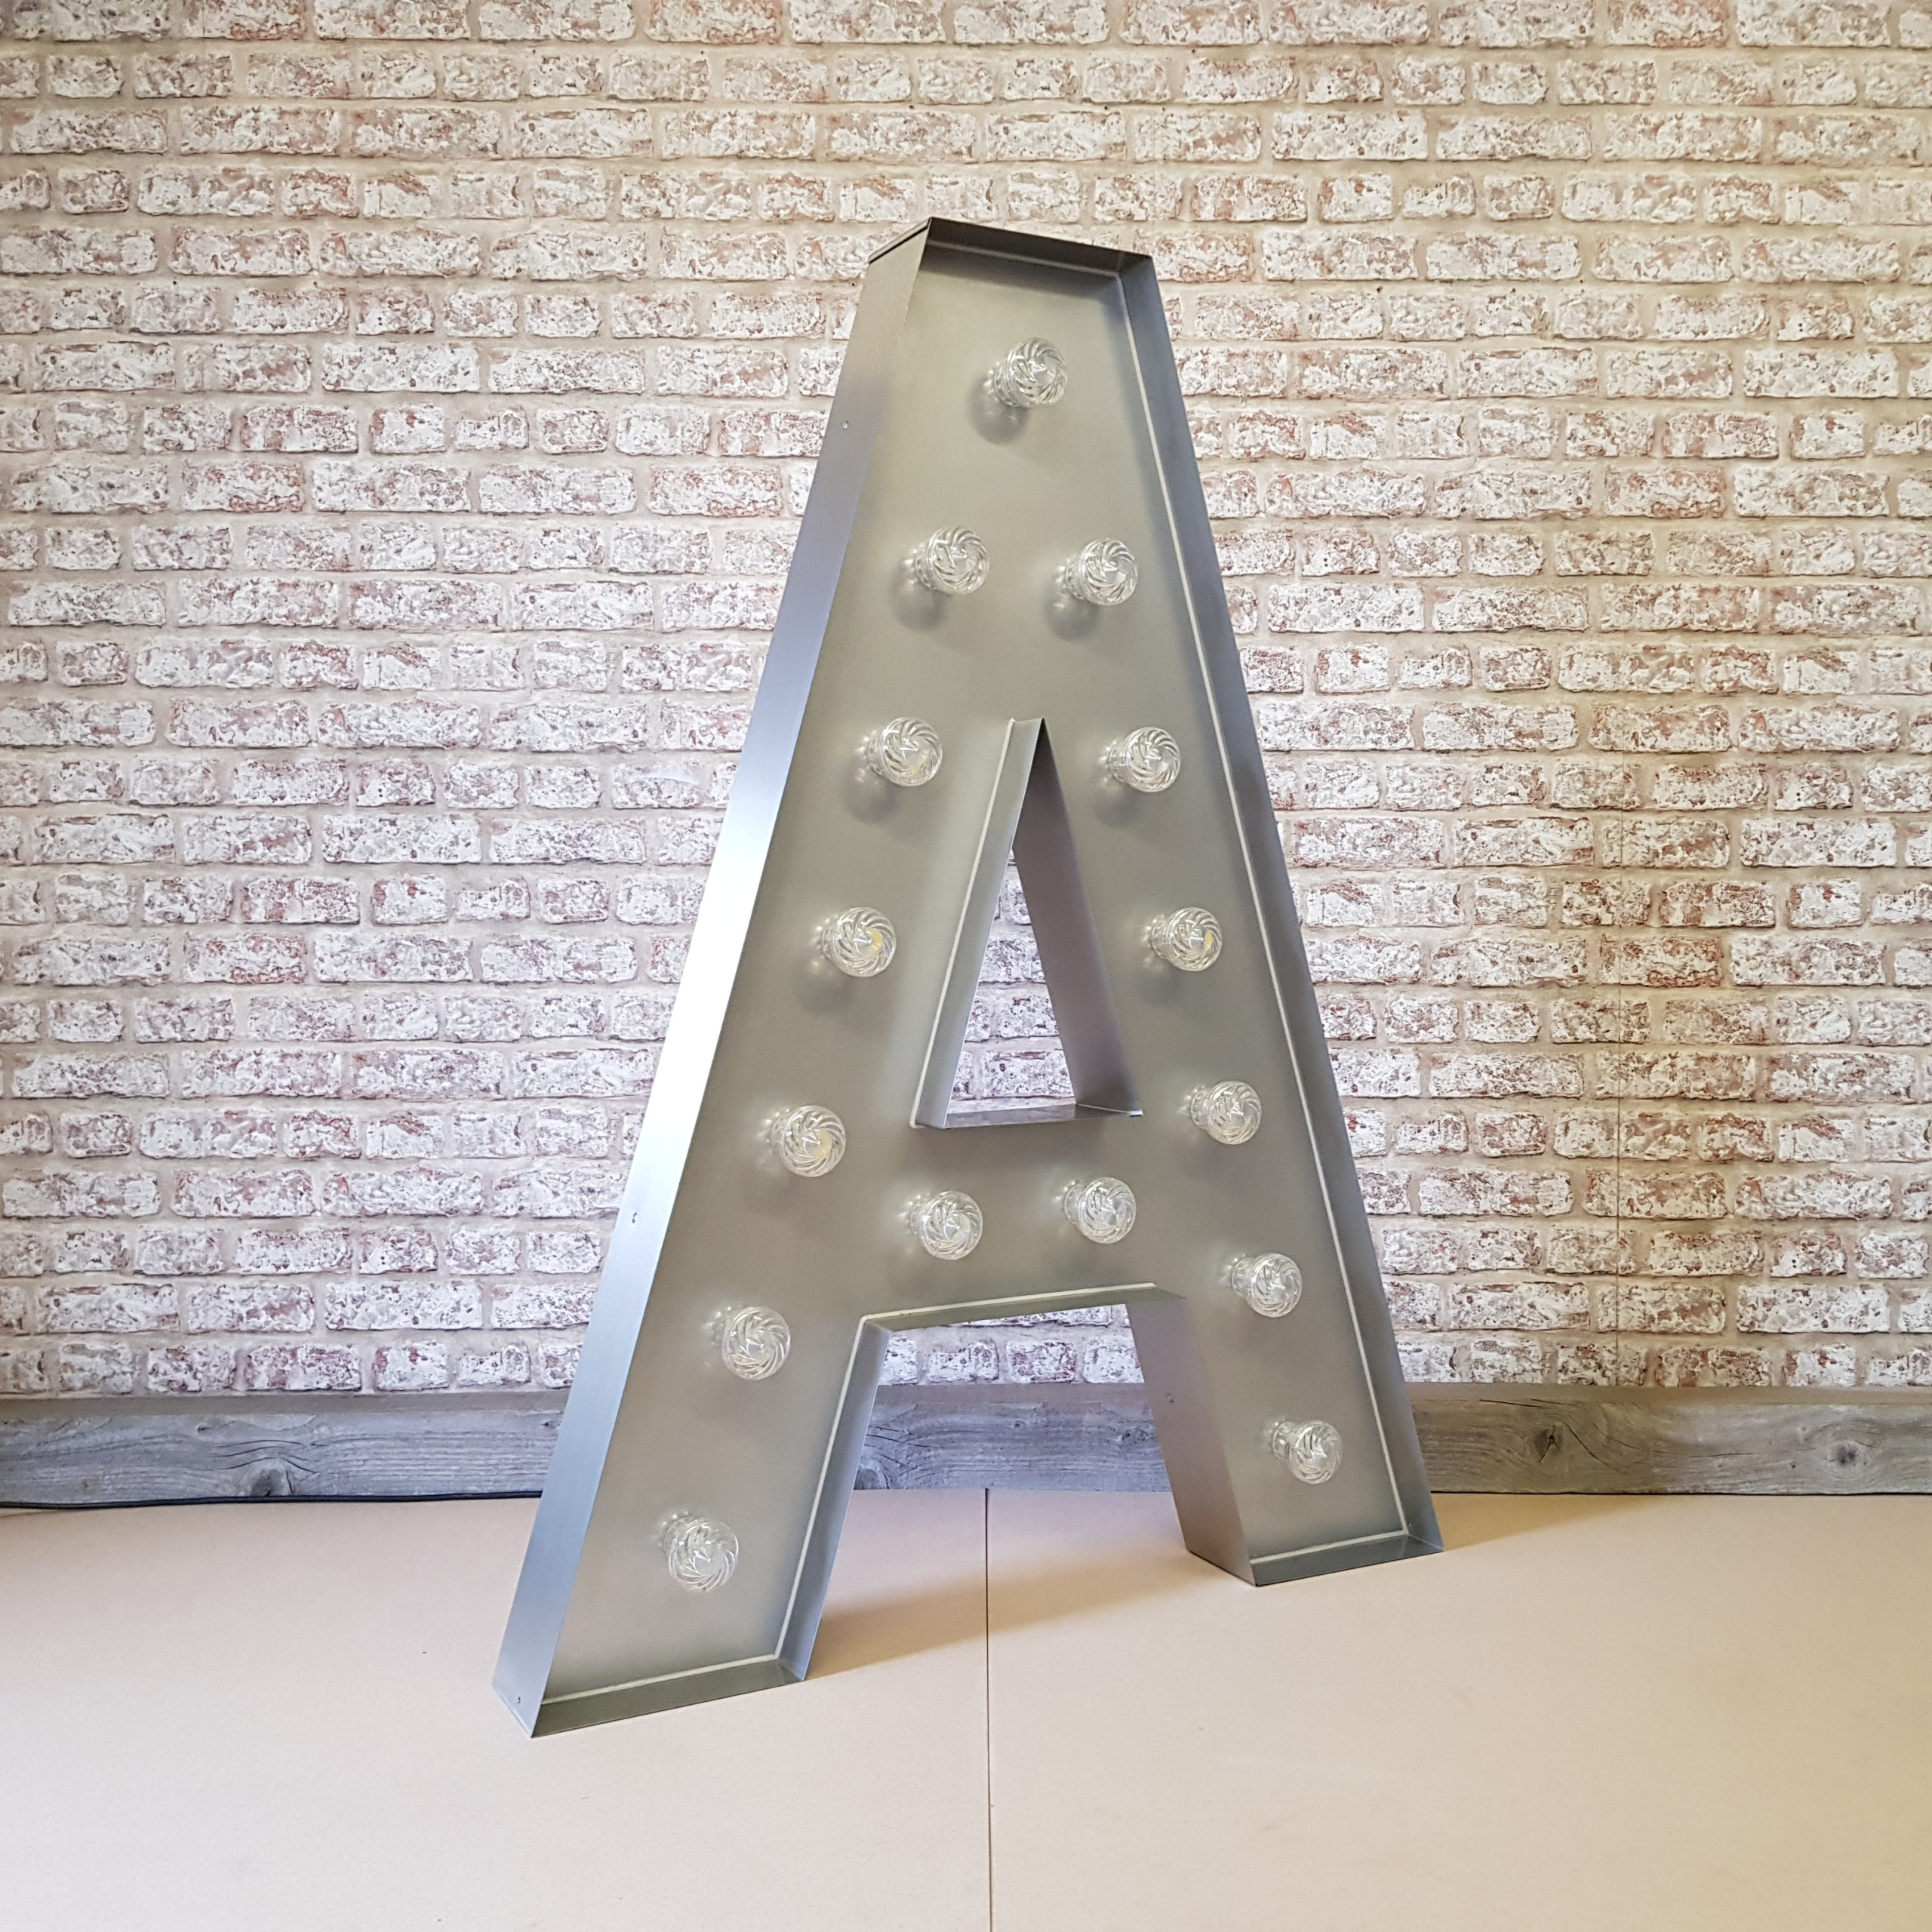 4ft marquee letters